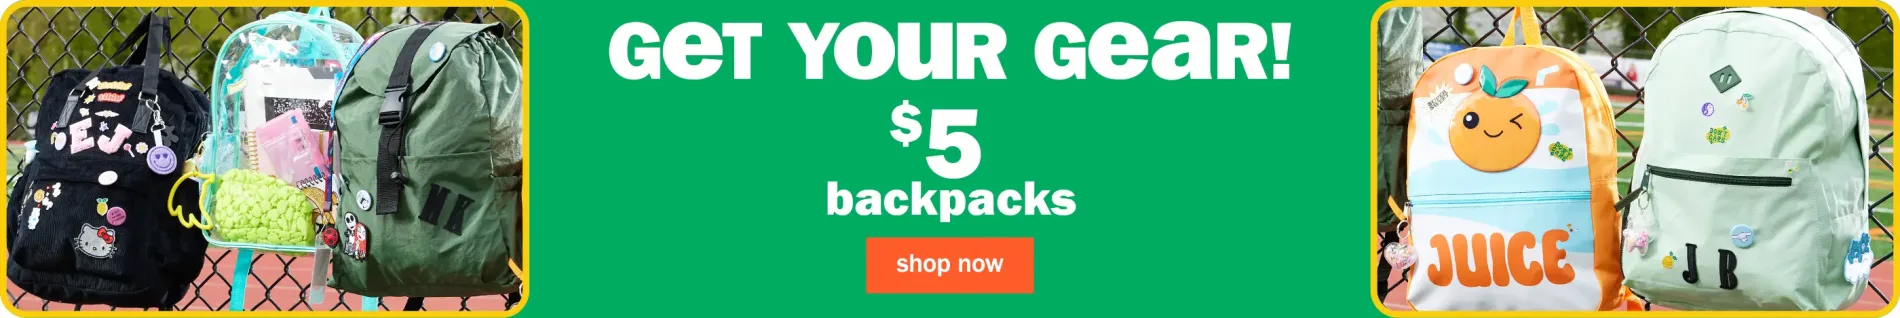 Get Your Gear! $5 Backpacks. Shop Now.